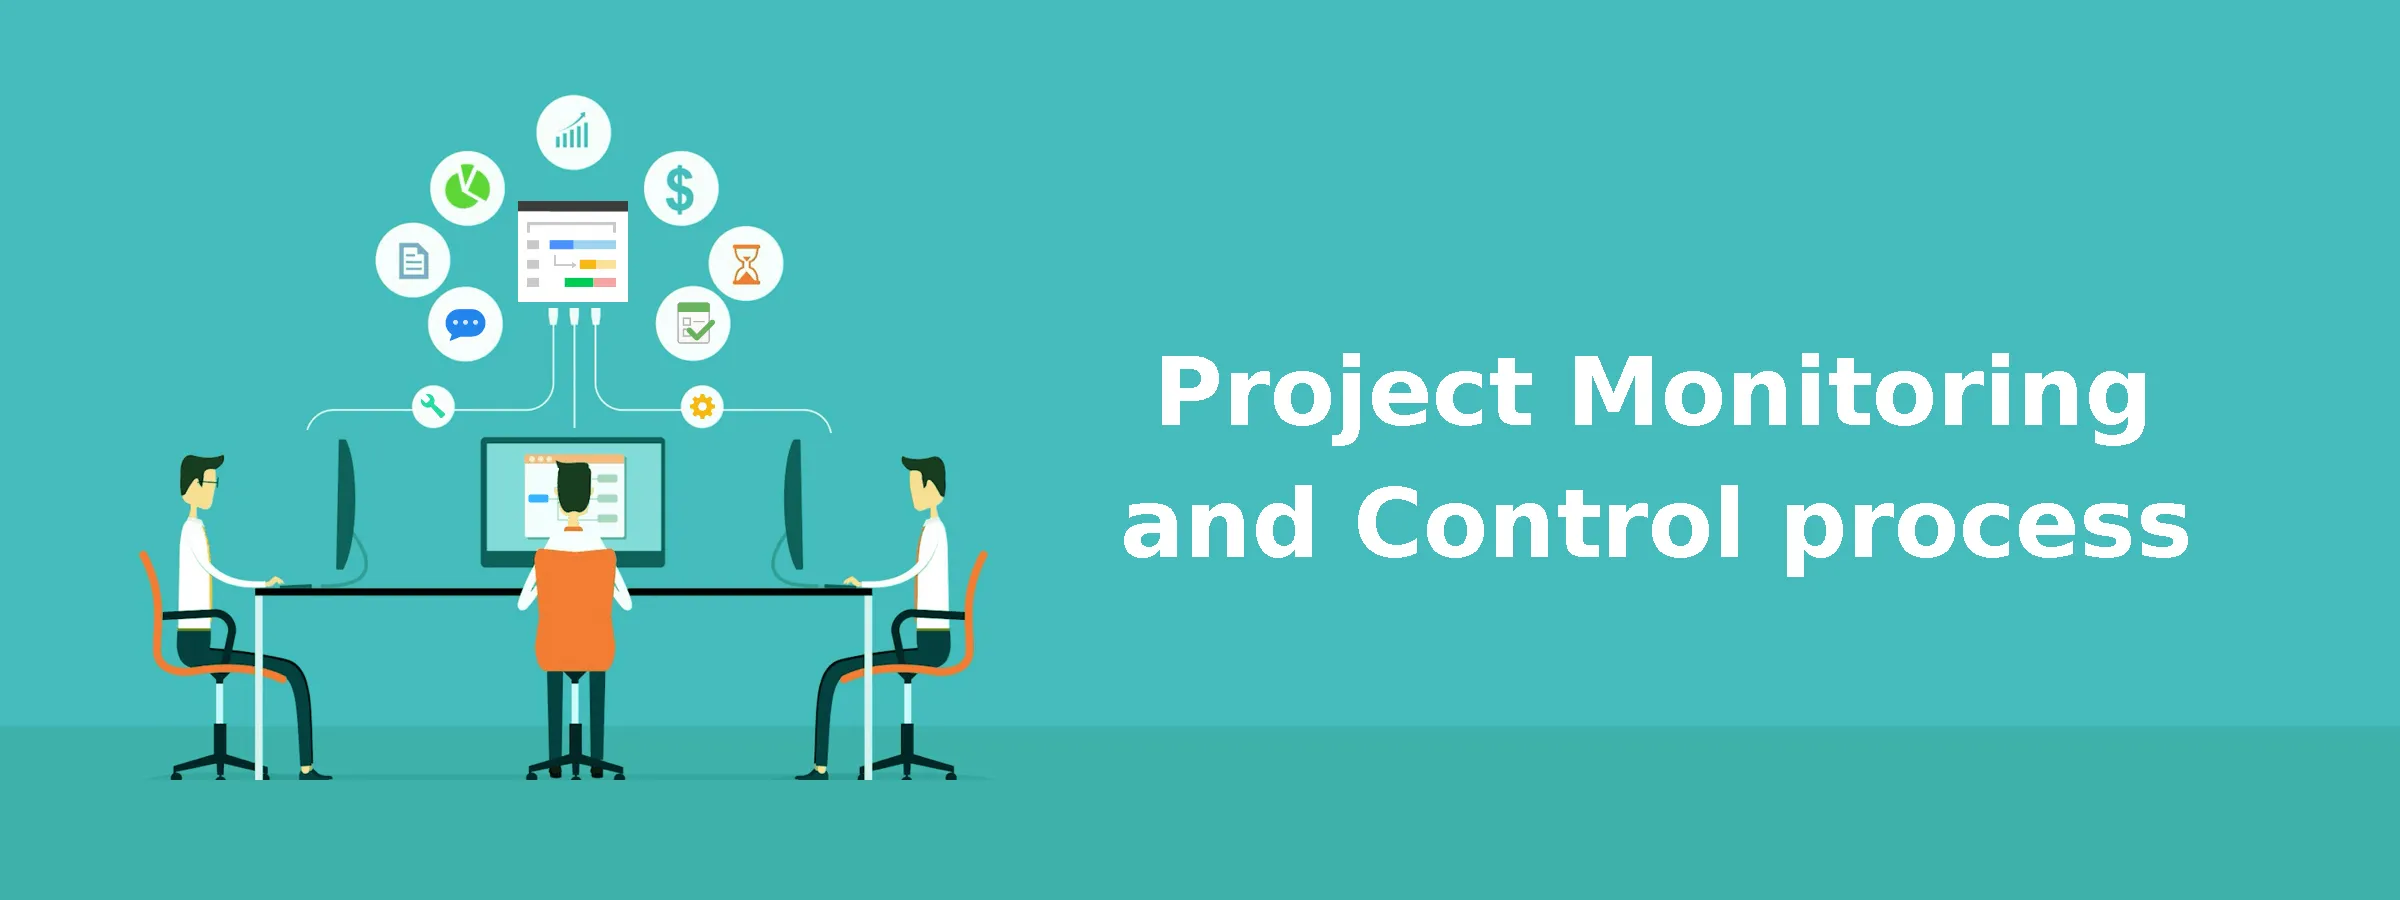 Project Monitoring and Control Process